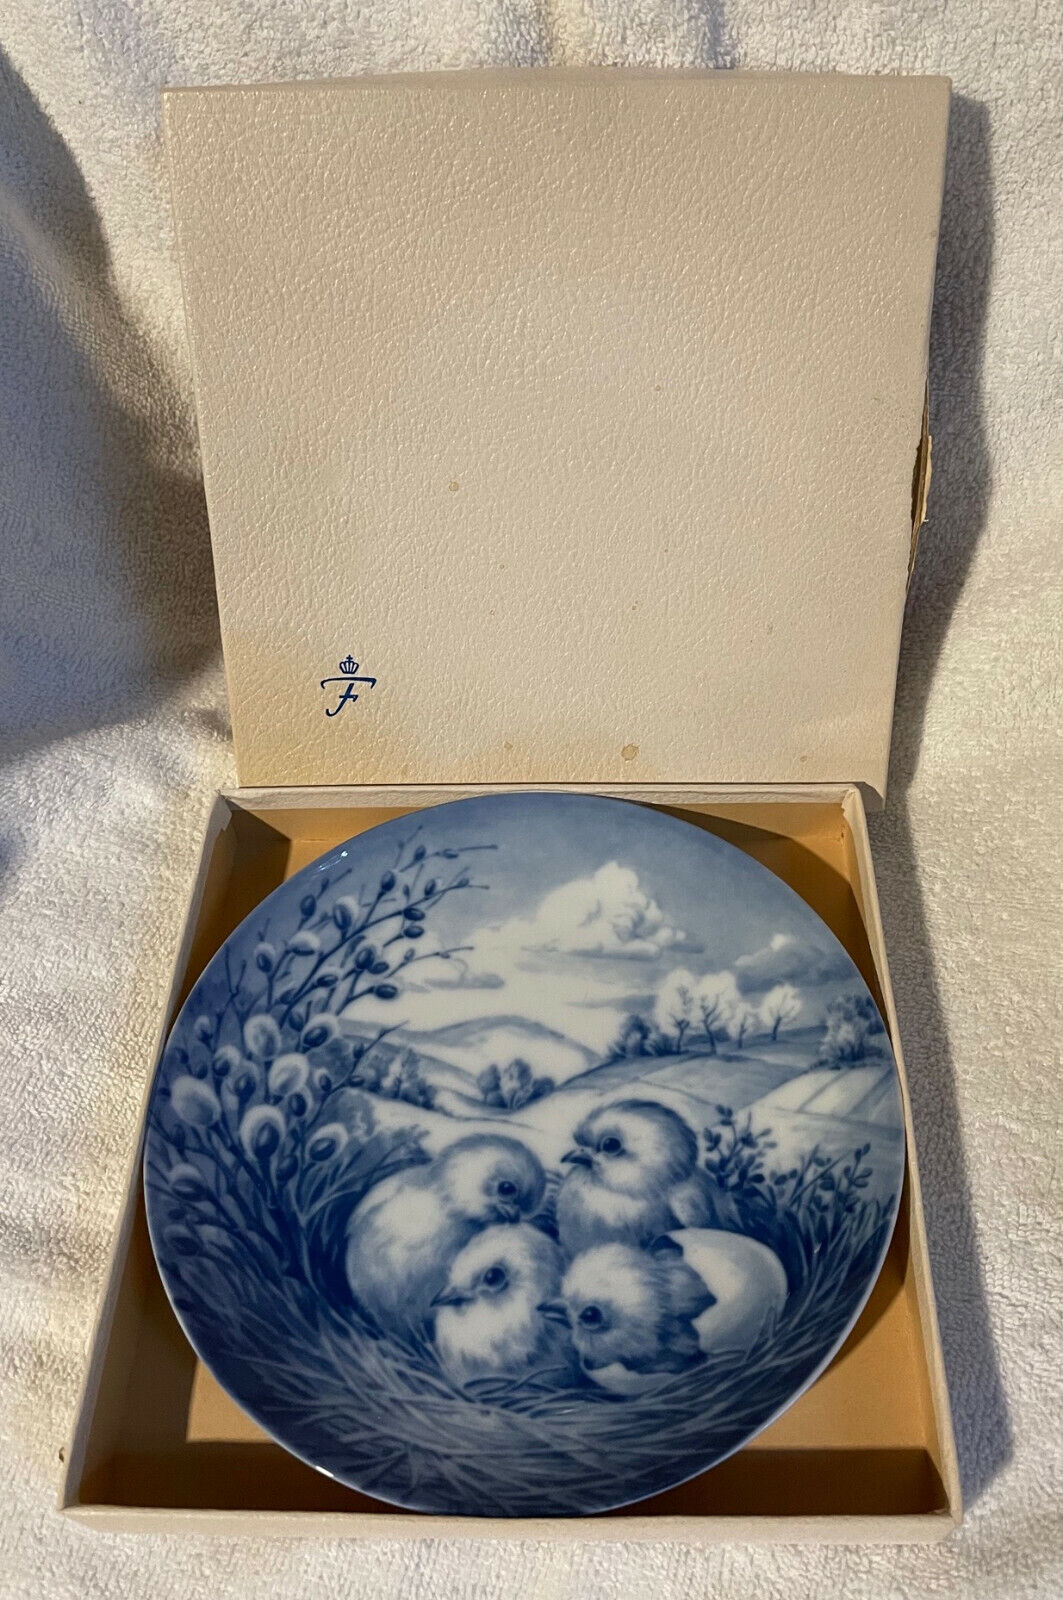 Vintage Furstenberg Easter Plate featuring chicks Limited Edition w/ box 1972